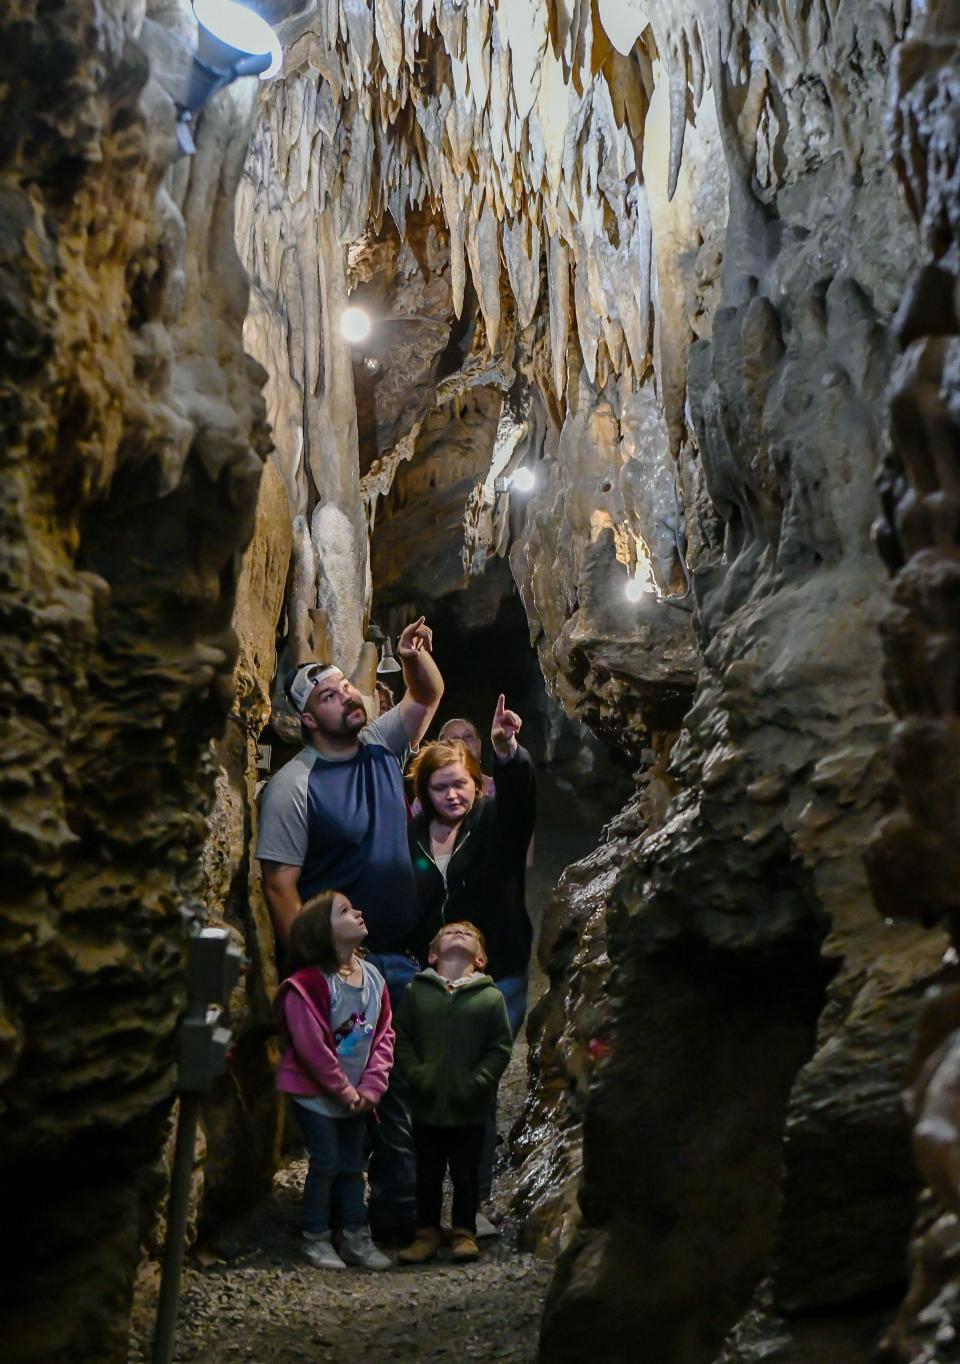 Ian and Mary Bridgers and their children, Mackenzie and Colton, look at the formations of calcite in Crystal Grottoes Caverns on Tuesday.